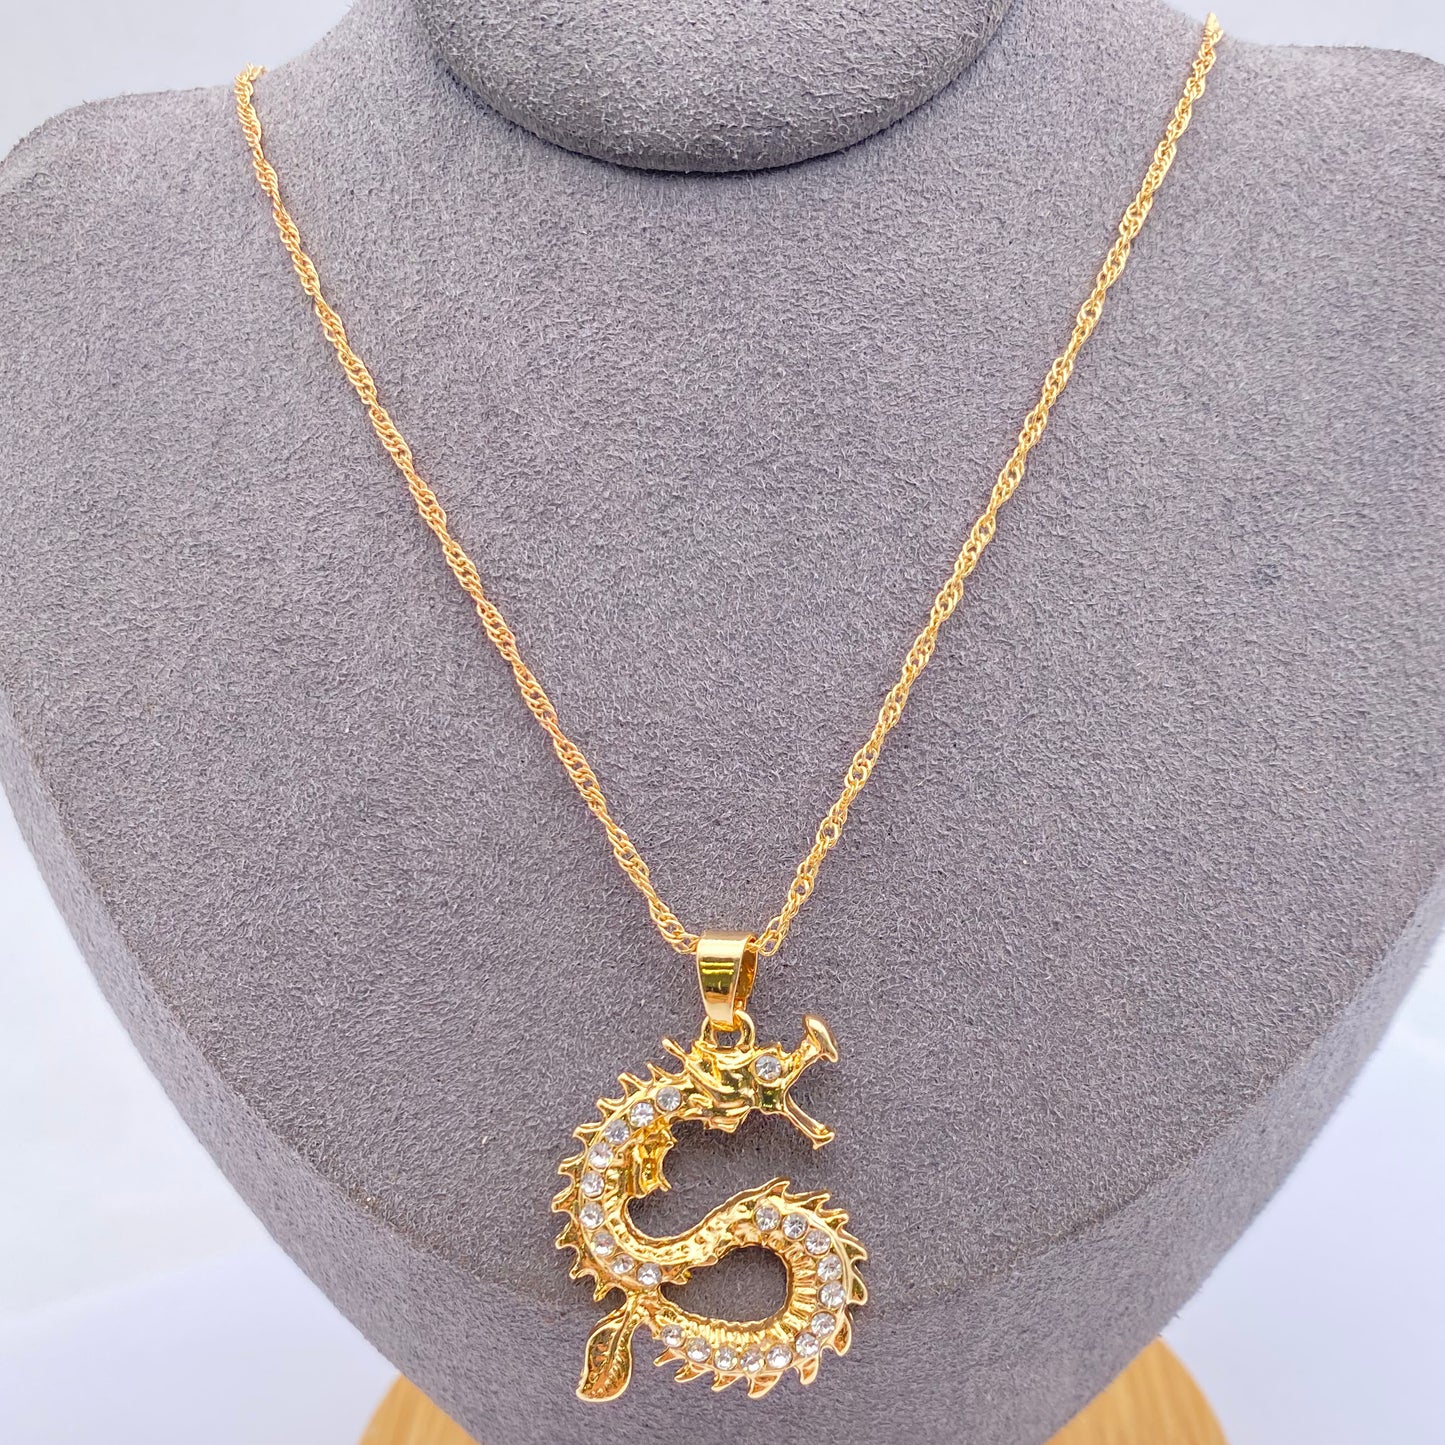 White Jewelled Gold Dragon Serpent pendant and chain